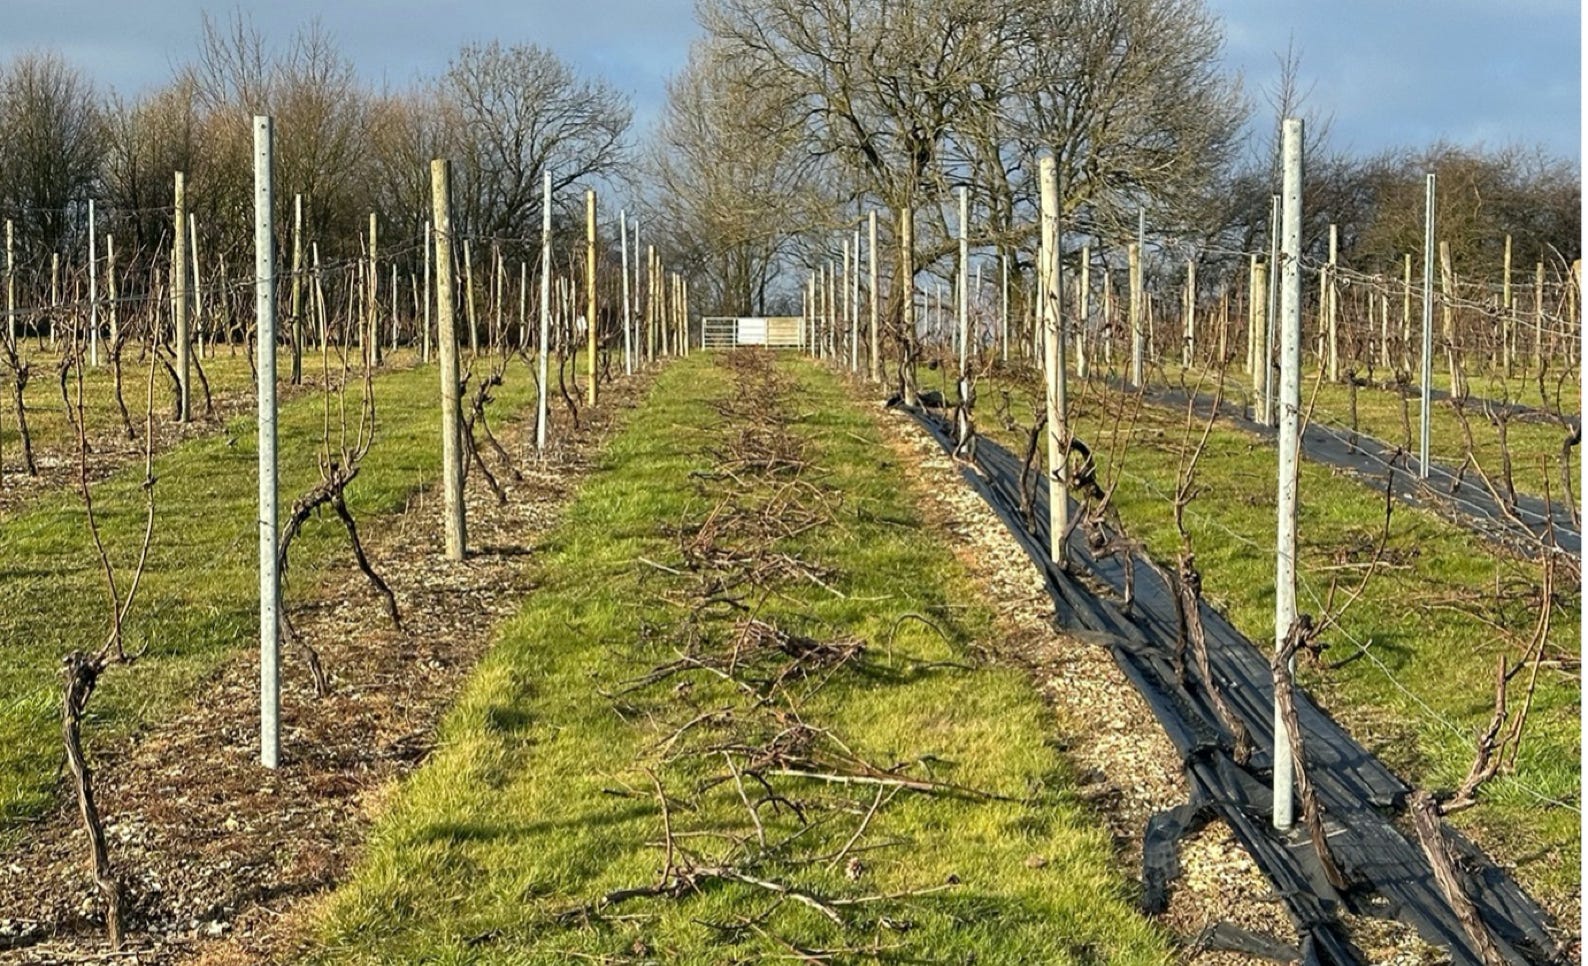 Vines after winter pruning at Little Wold Vineyard